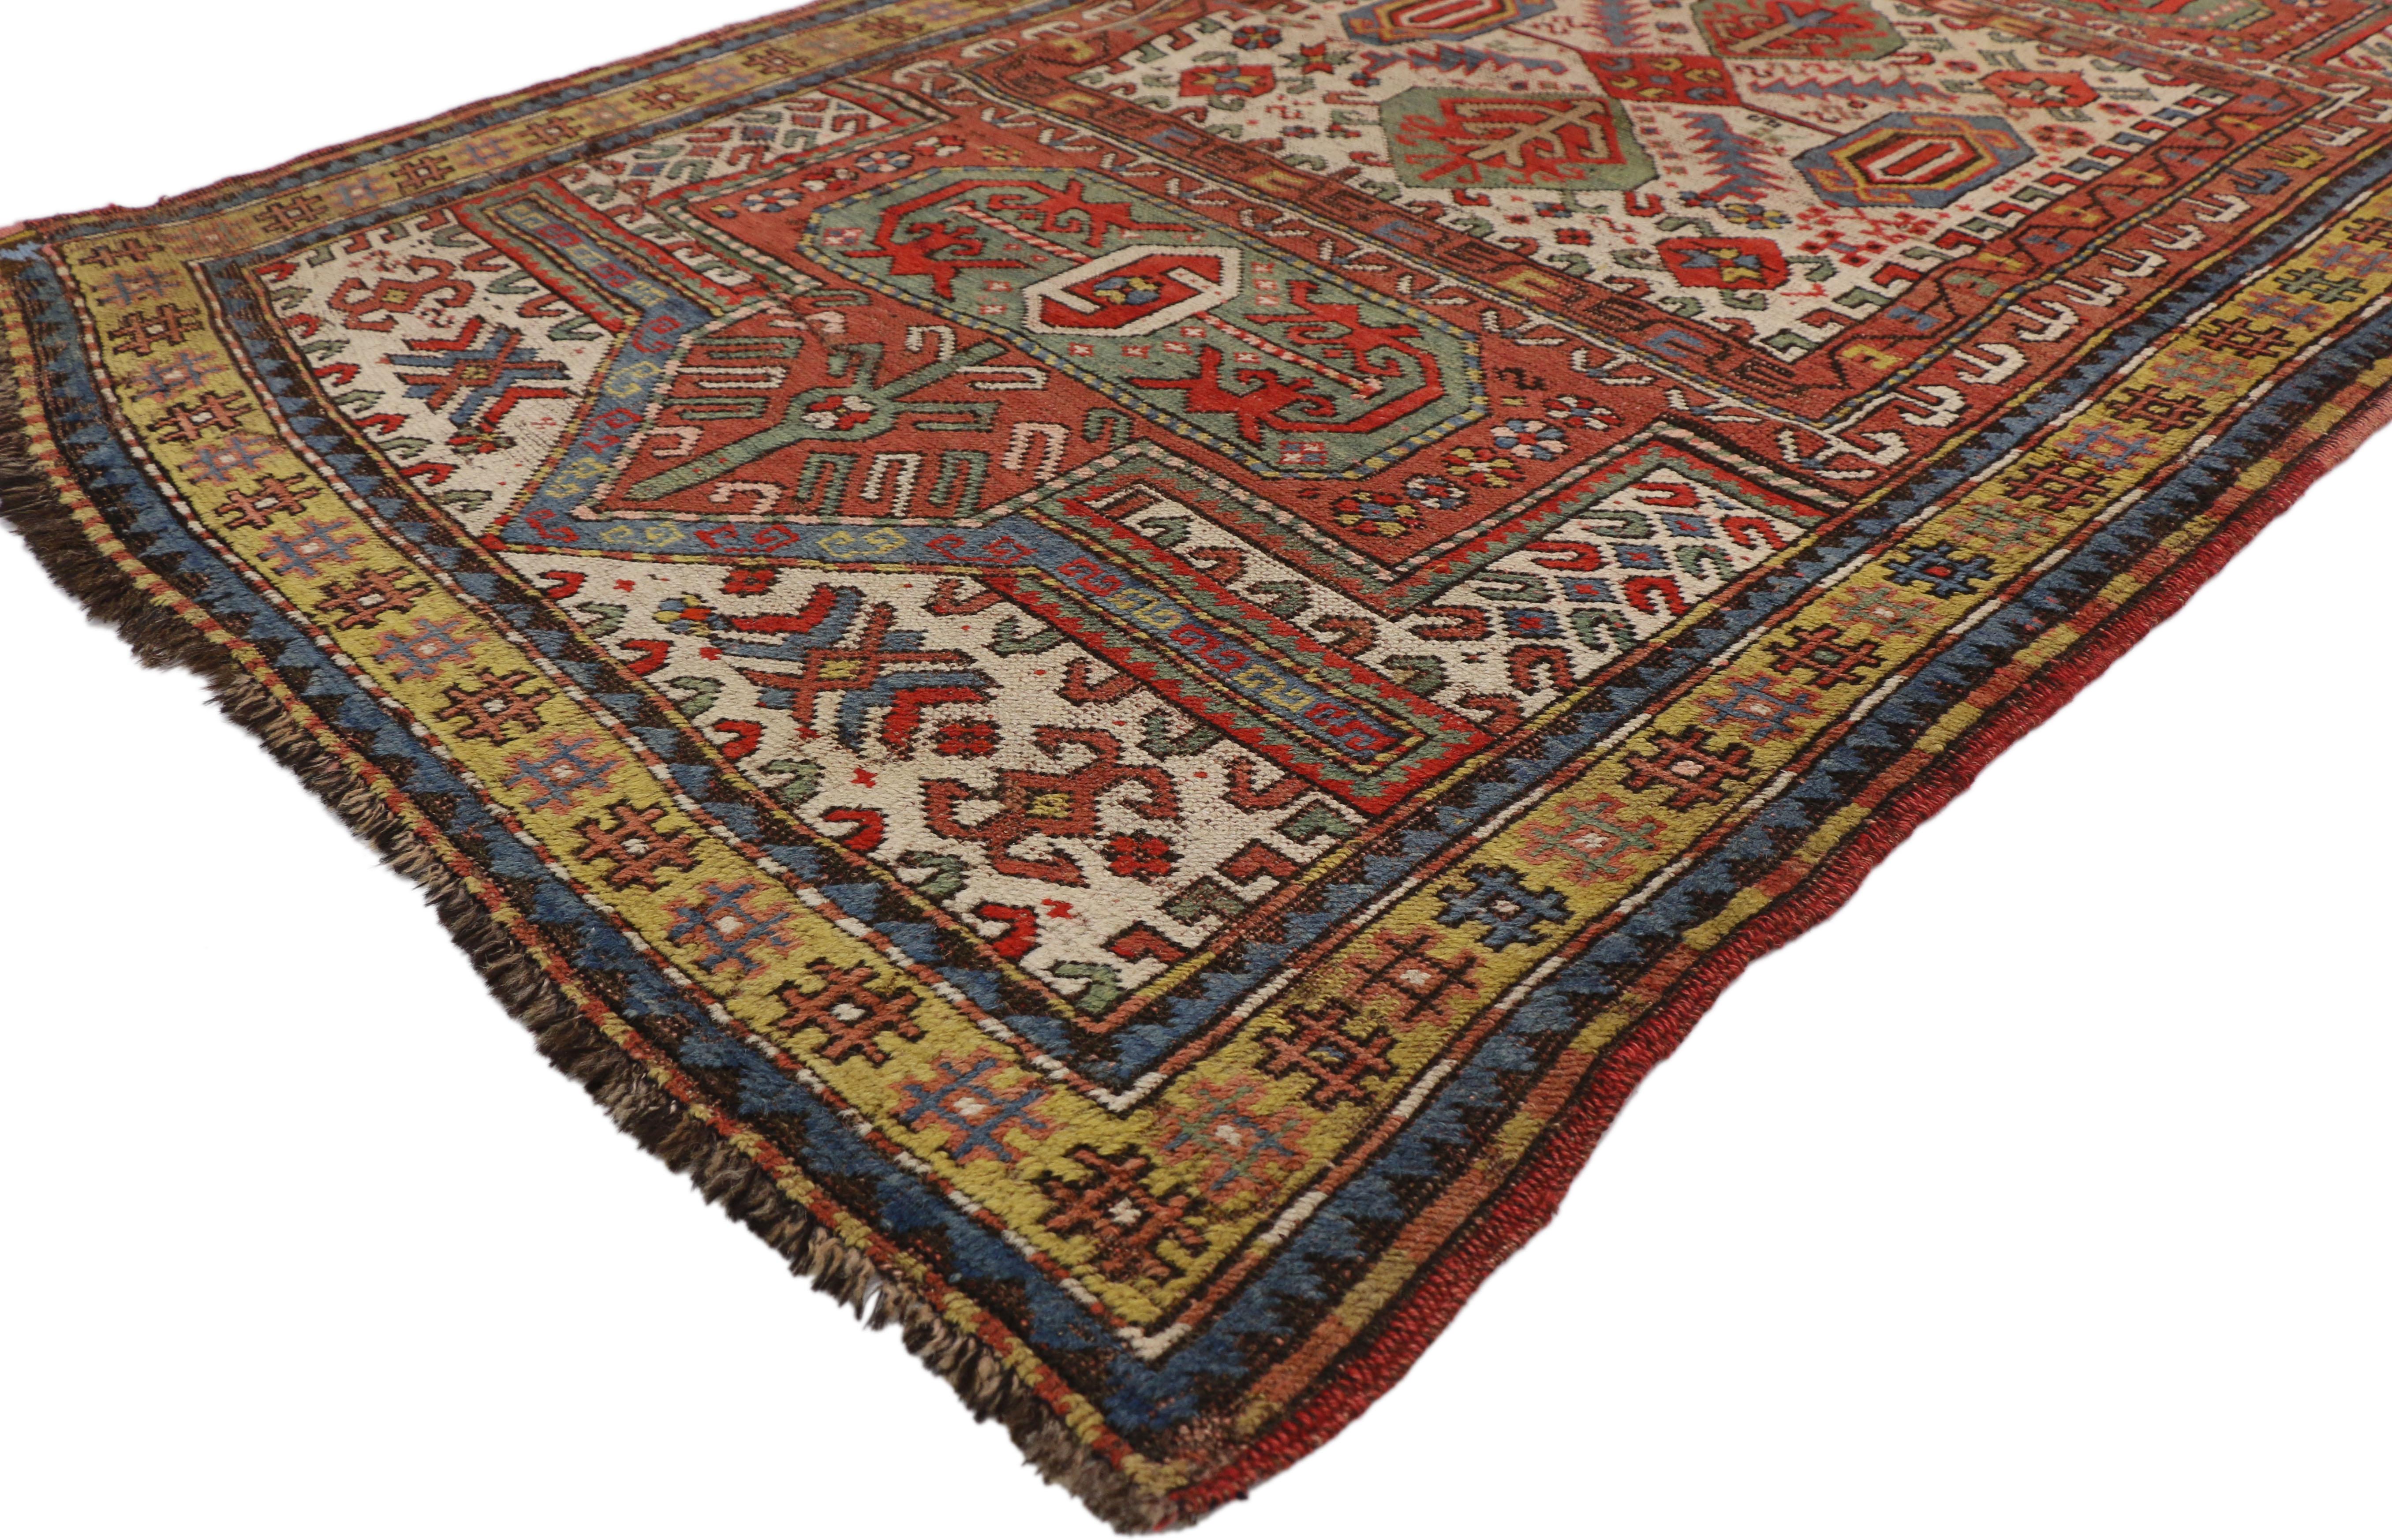 74400, antique Russian tribal Kazak Prayer rug with compartment design Caucasian rug. With its traditional and ancient tribal designs, this antique Caucasian Kazak prayer rug takes on a curated look that feels timeless yet classic. It features a